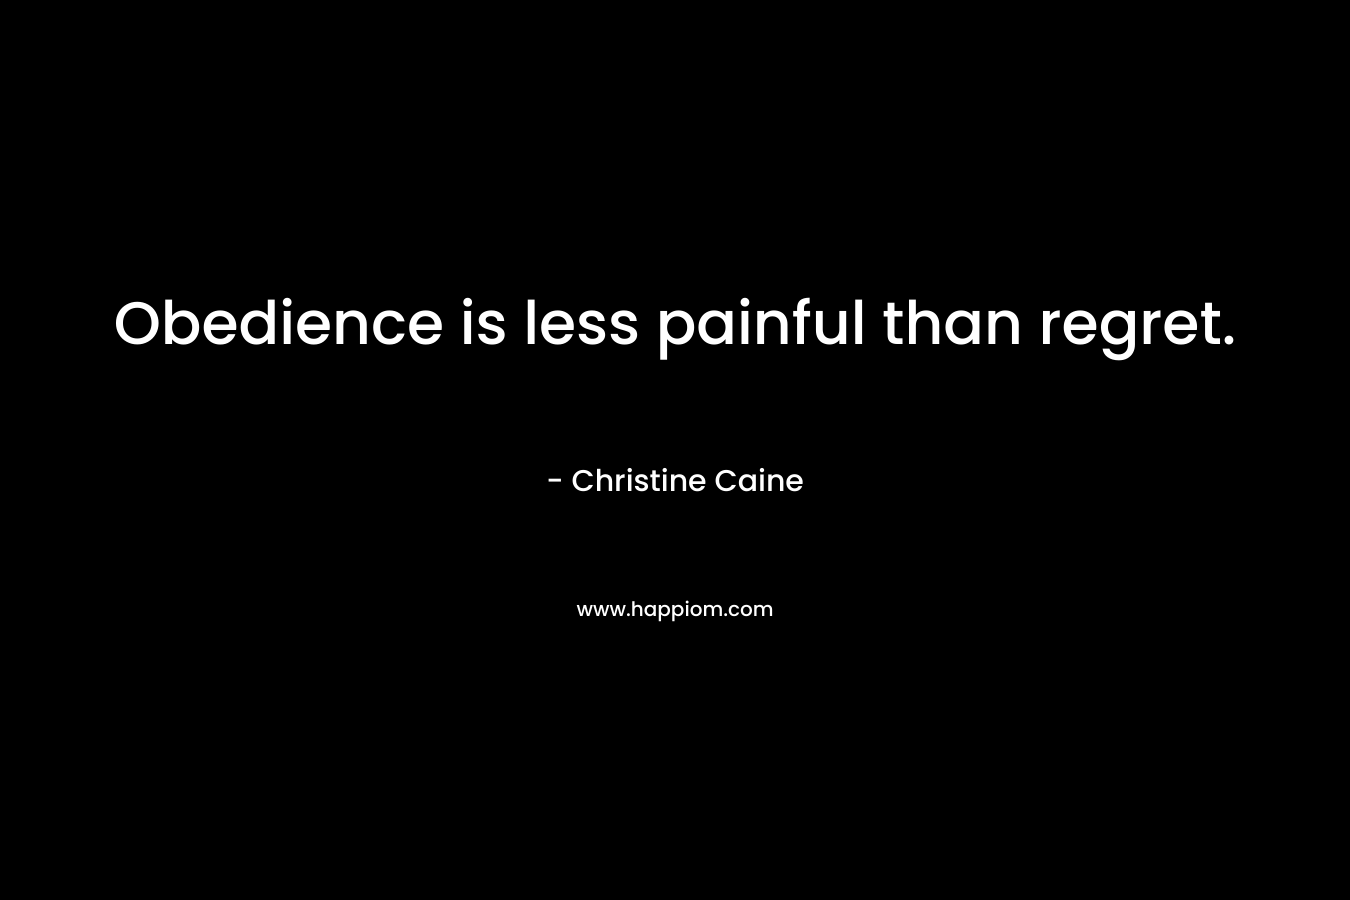 Obedience is less painful than regret. – Christine Caine